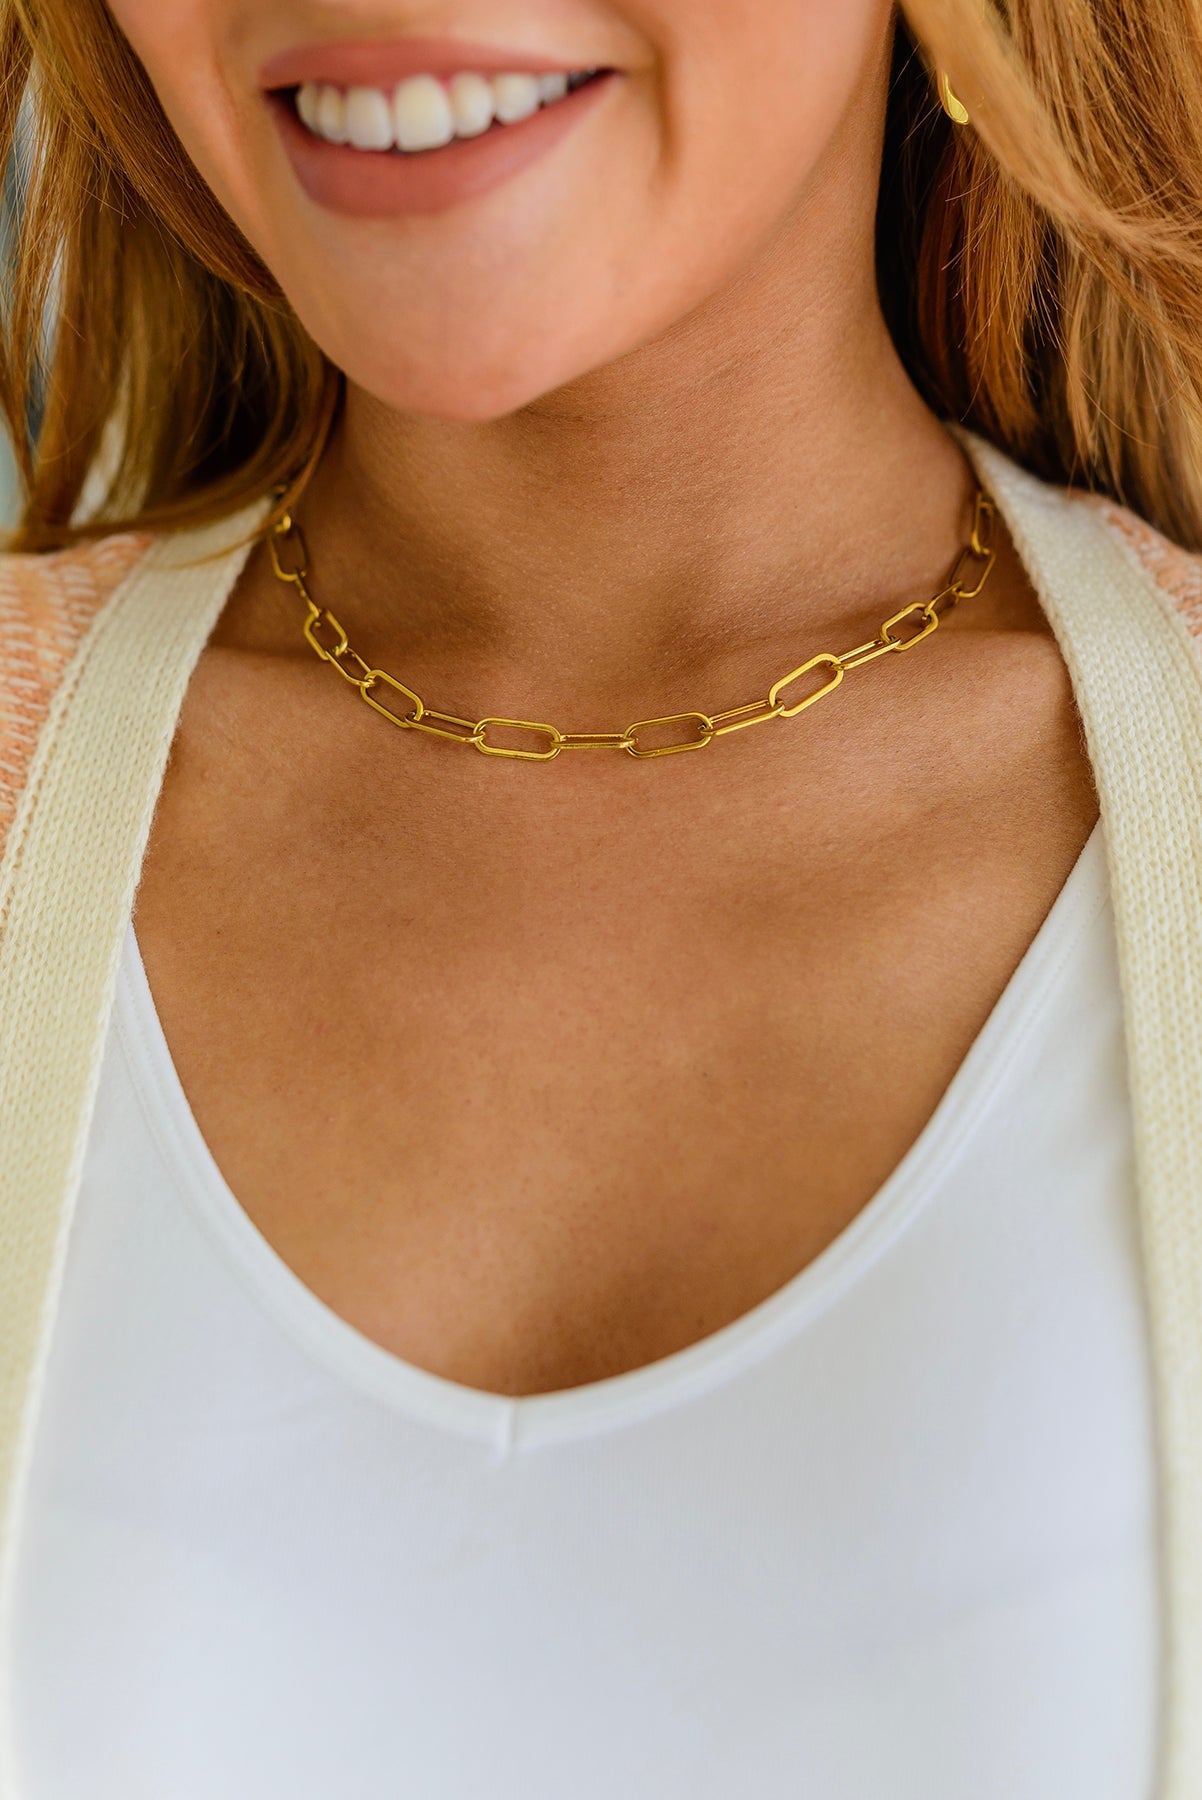 Waterproof Jewelry: Classic Paper Clip Chain Necklace